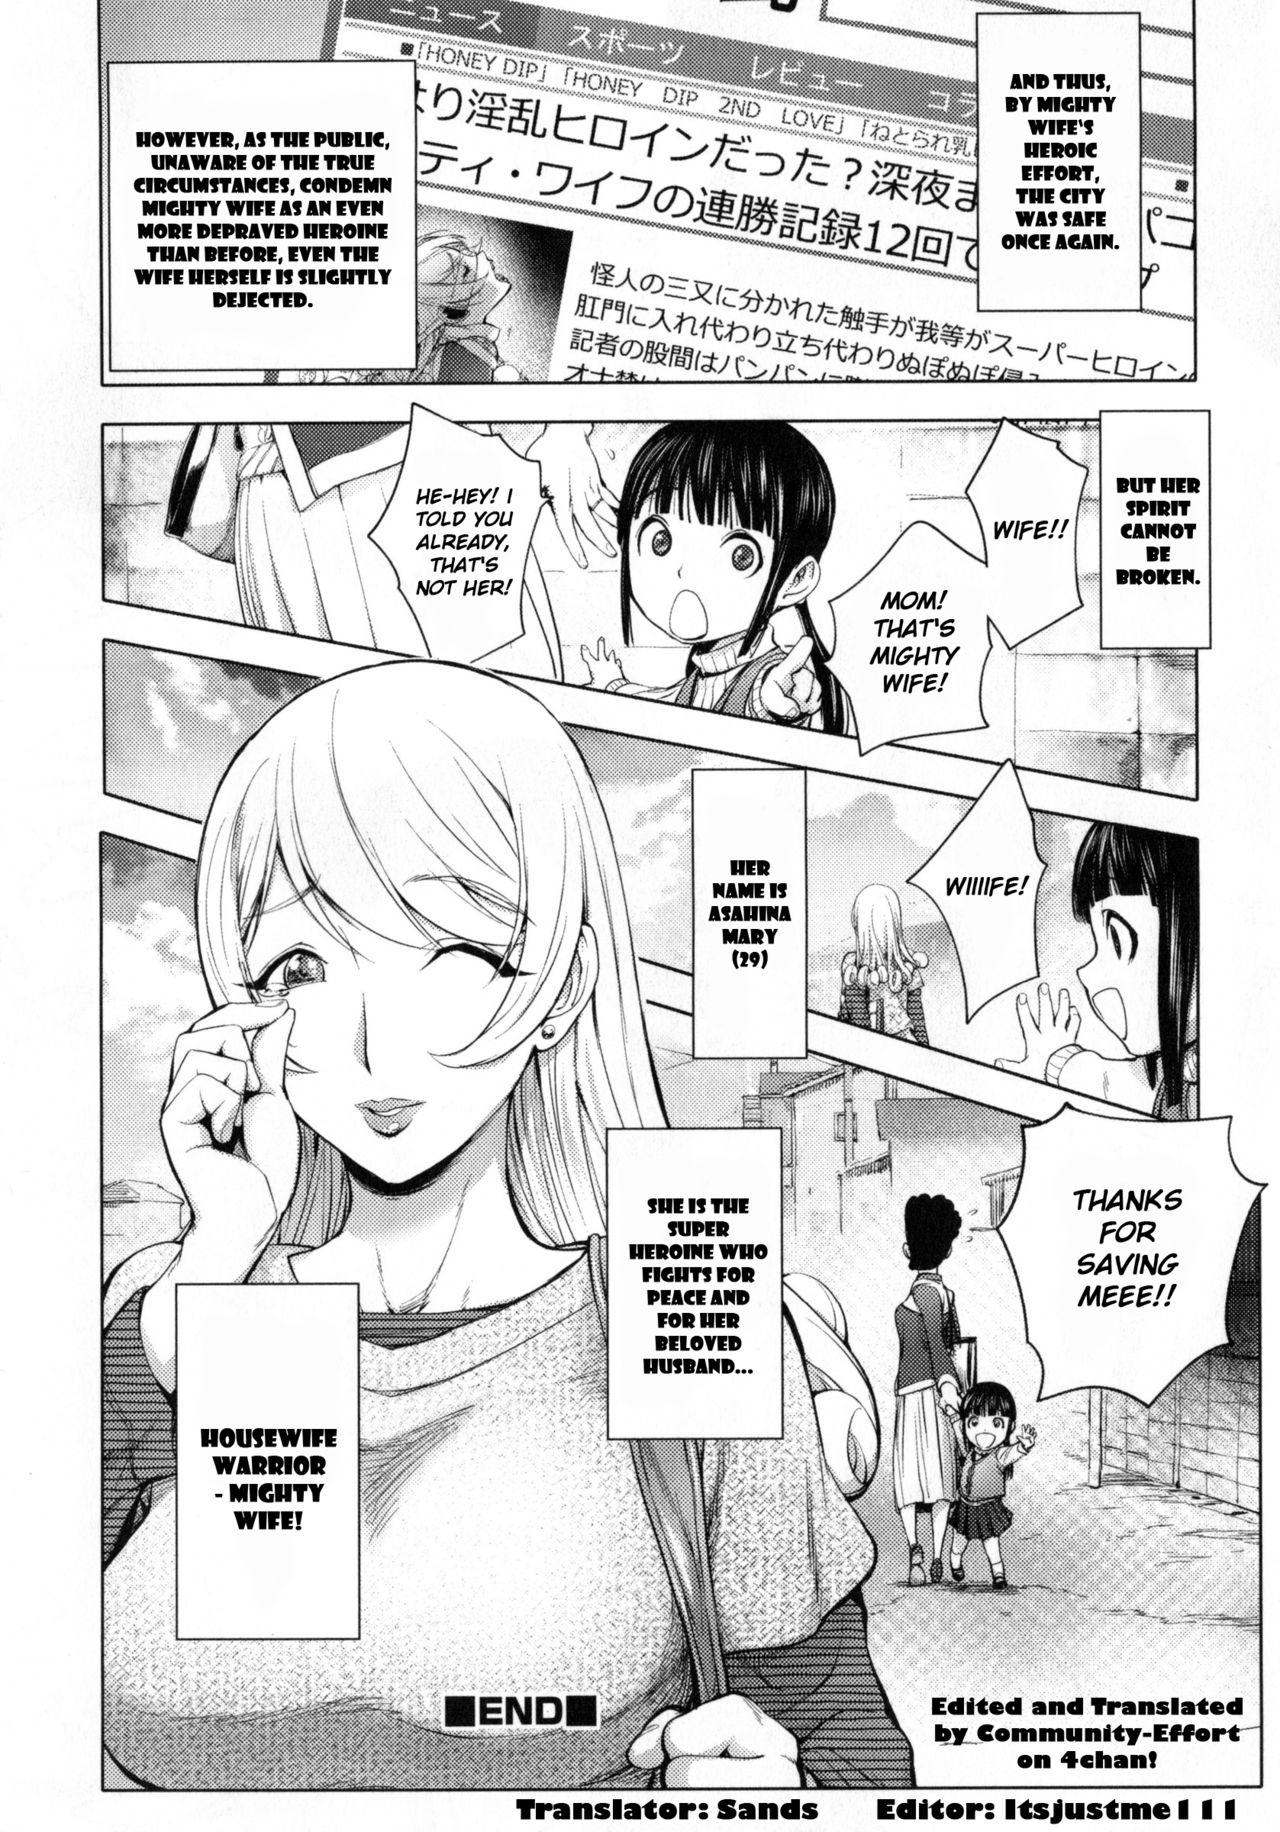 Teenage Porn Aisai Senshi Mighty Wife 8th | Beloved Housewife Warrior Mighty Wife 8th Nasty - Page 19